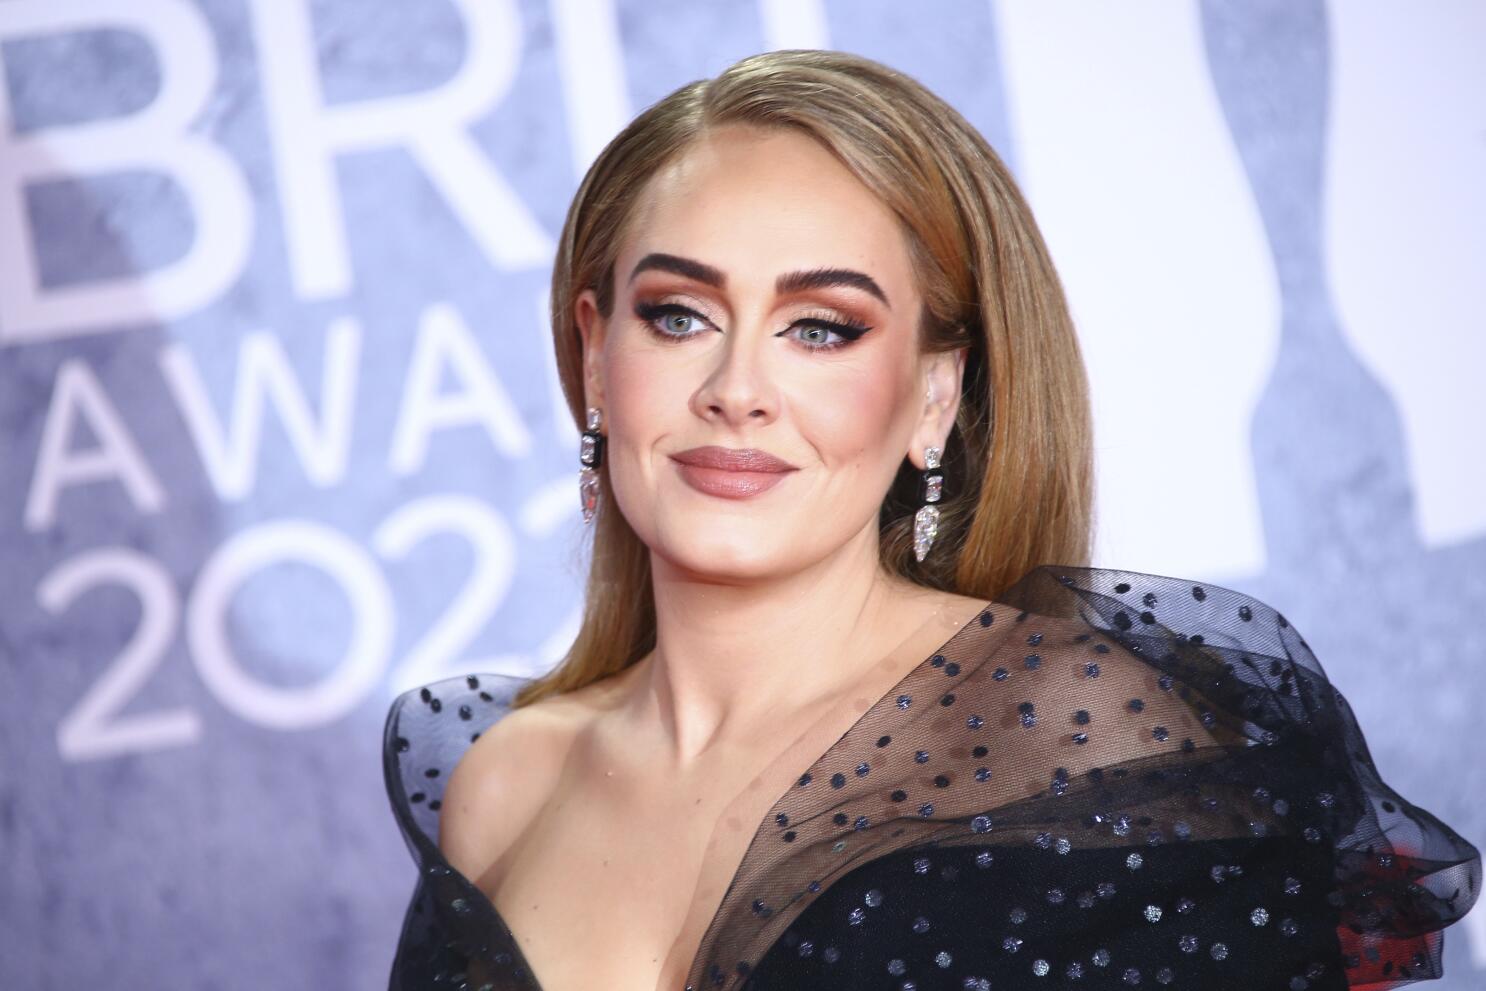 What Year Is The Singer Adele Born?